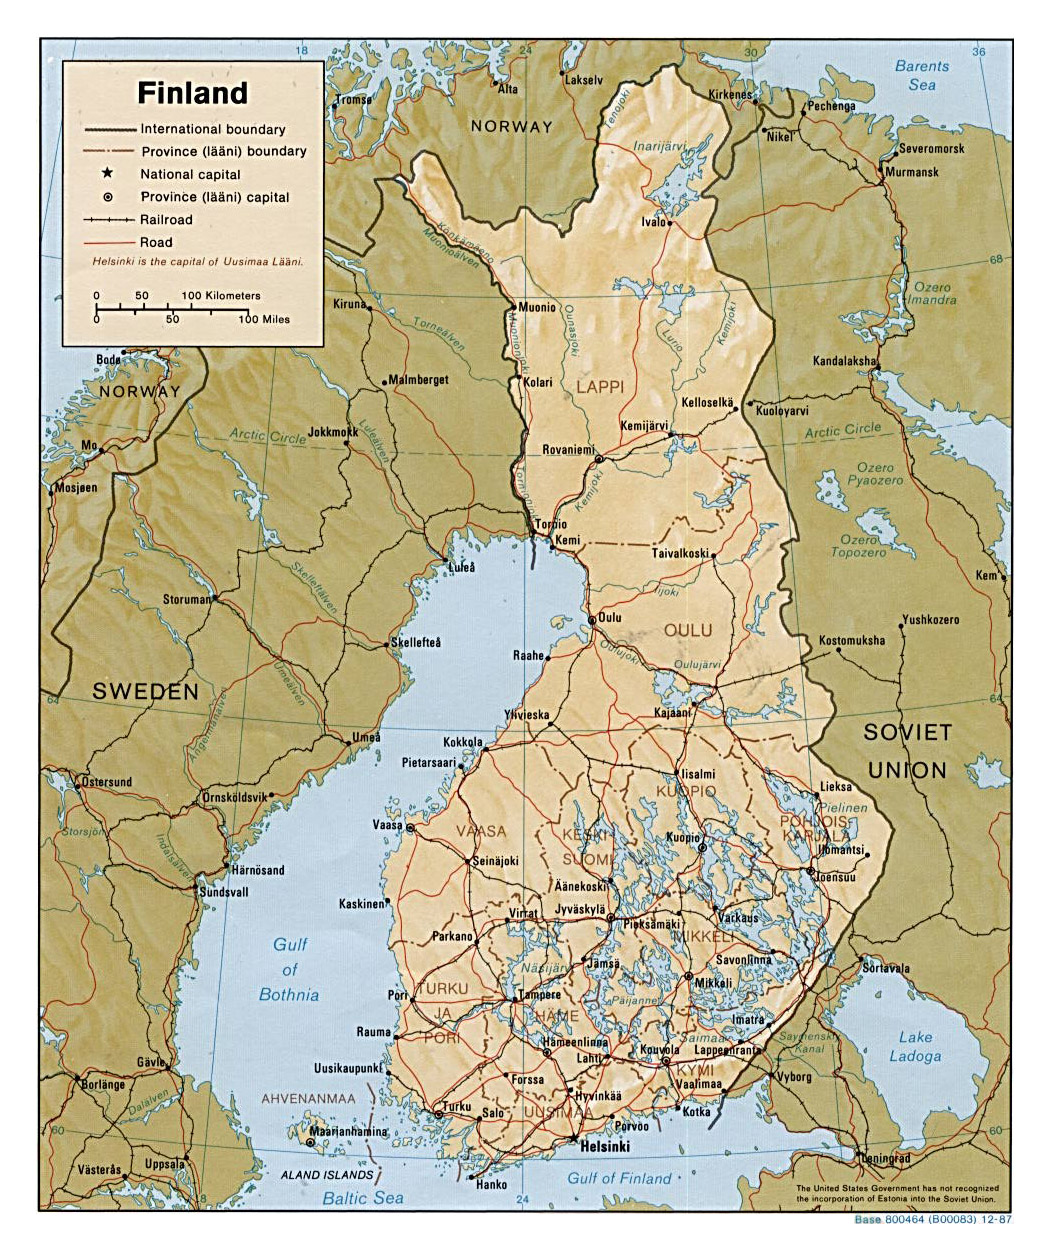 Detailed political and administrative map of Finland with relief, roads